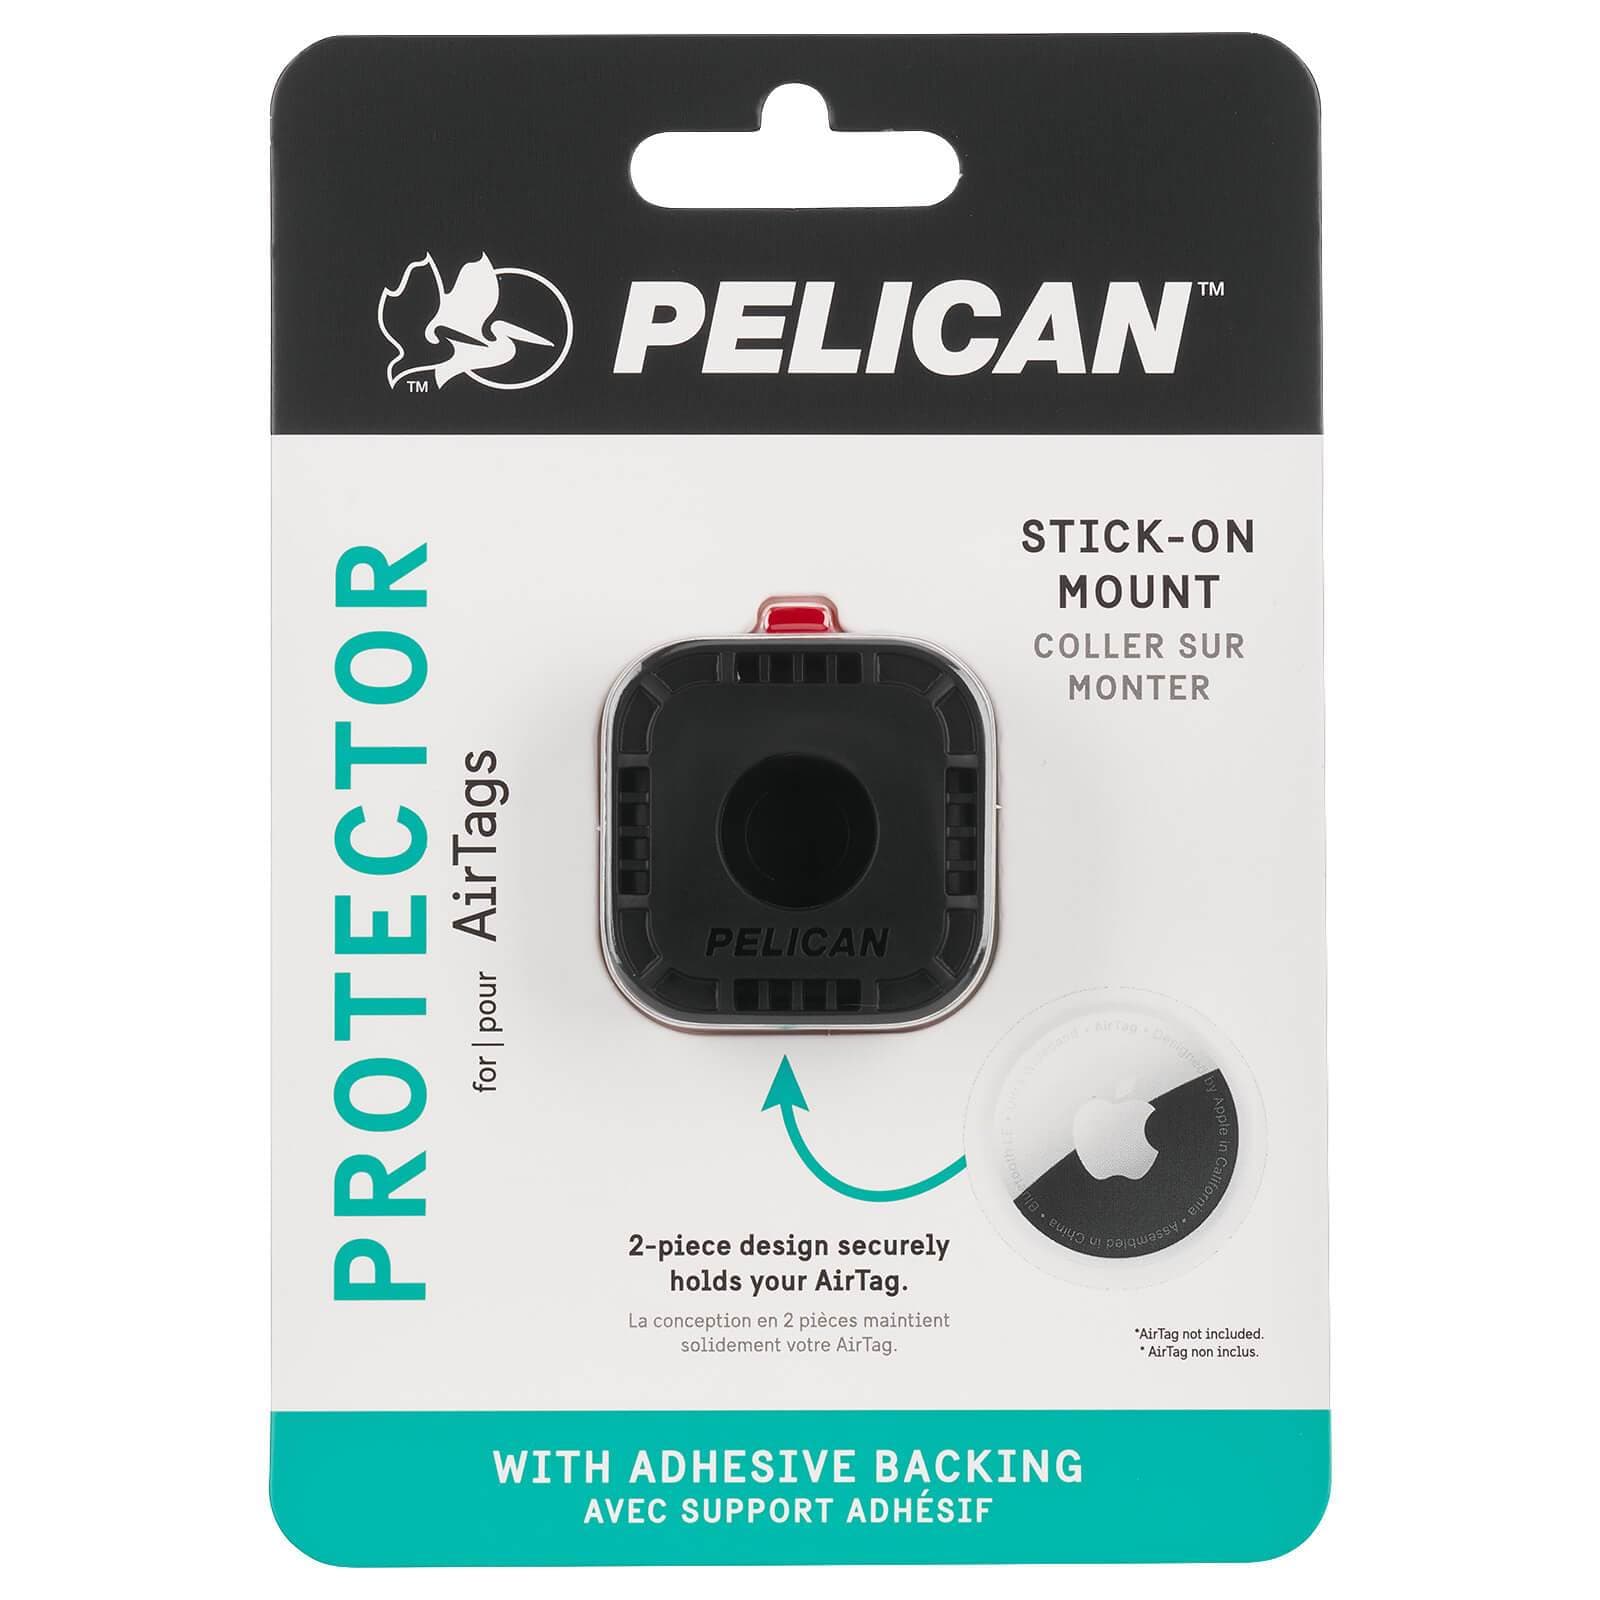 Pelican Protector for AirTags. Stick-on mount. 2-piece design securely holds your AirTag with Adhesive Backing. color::Black